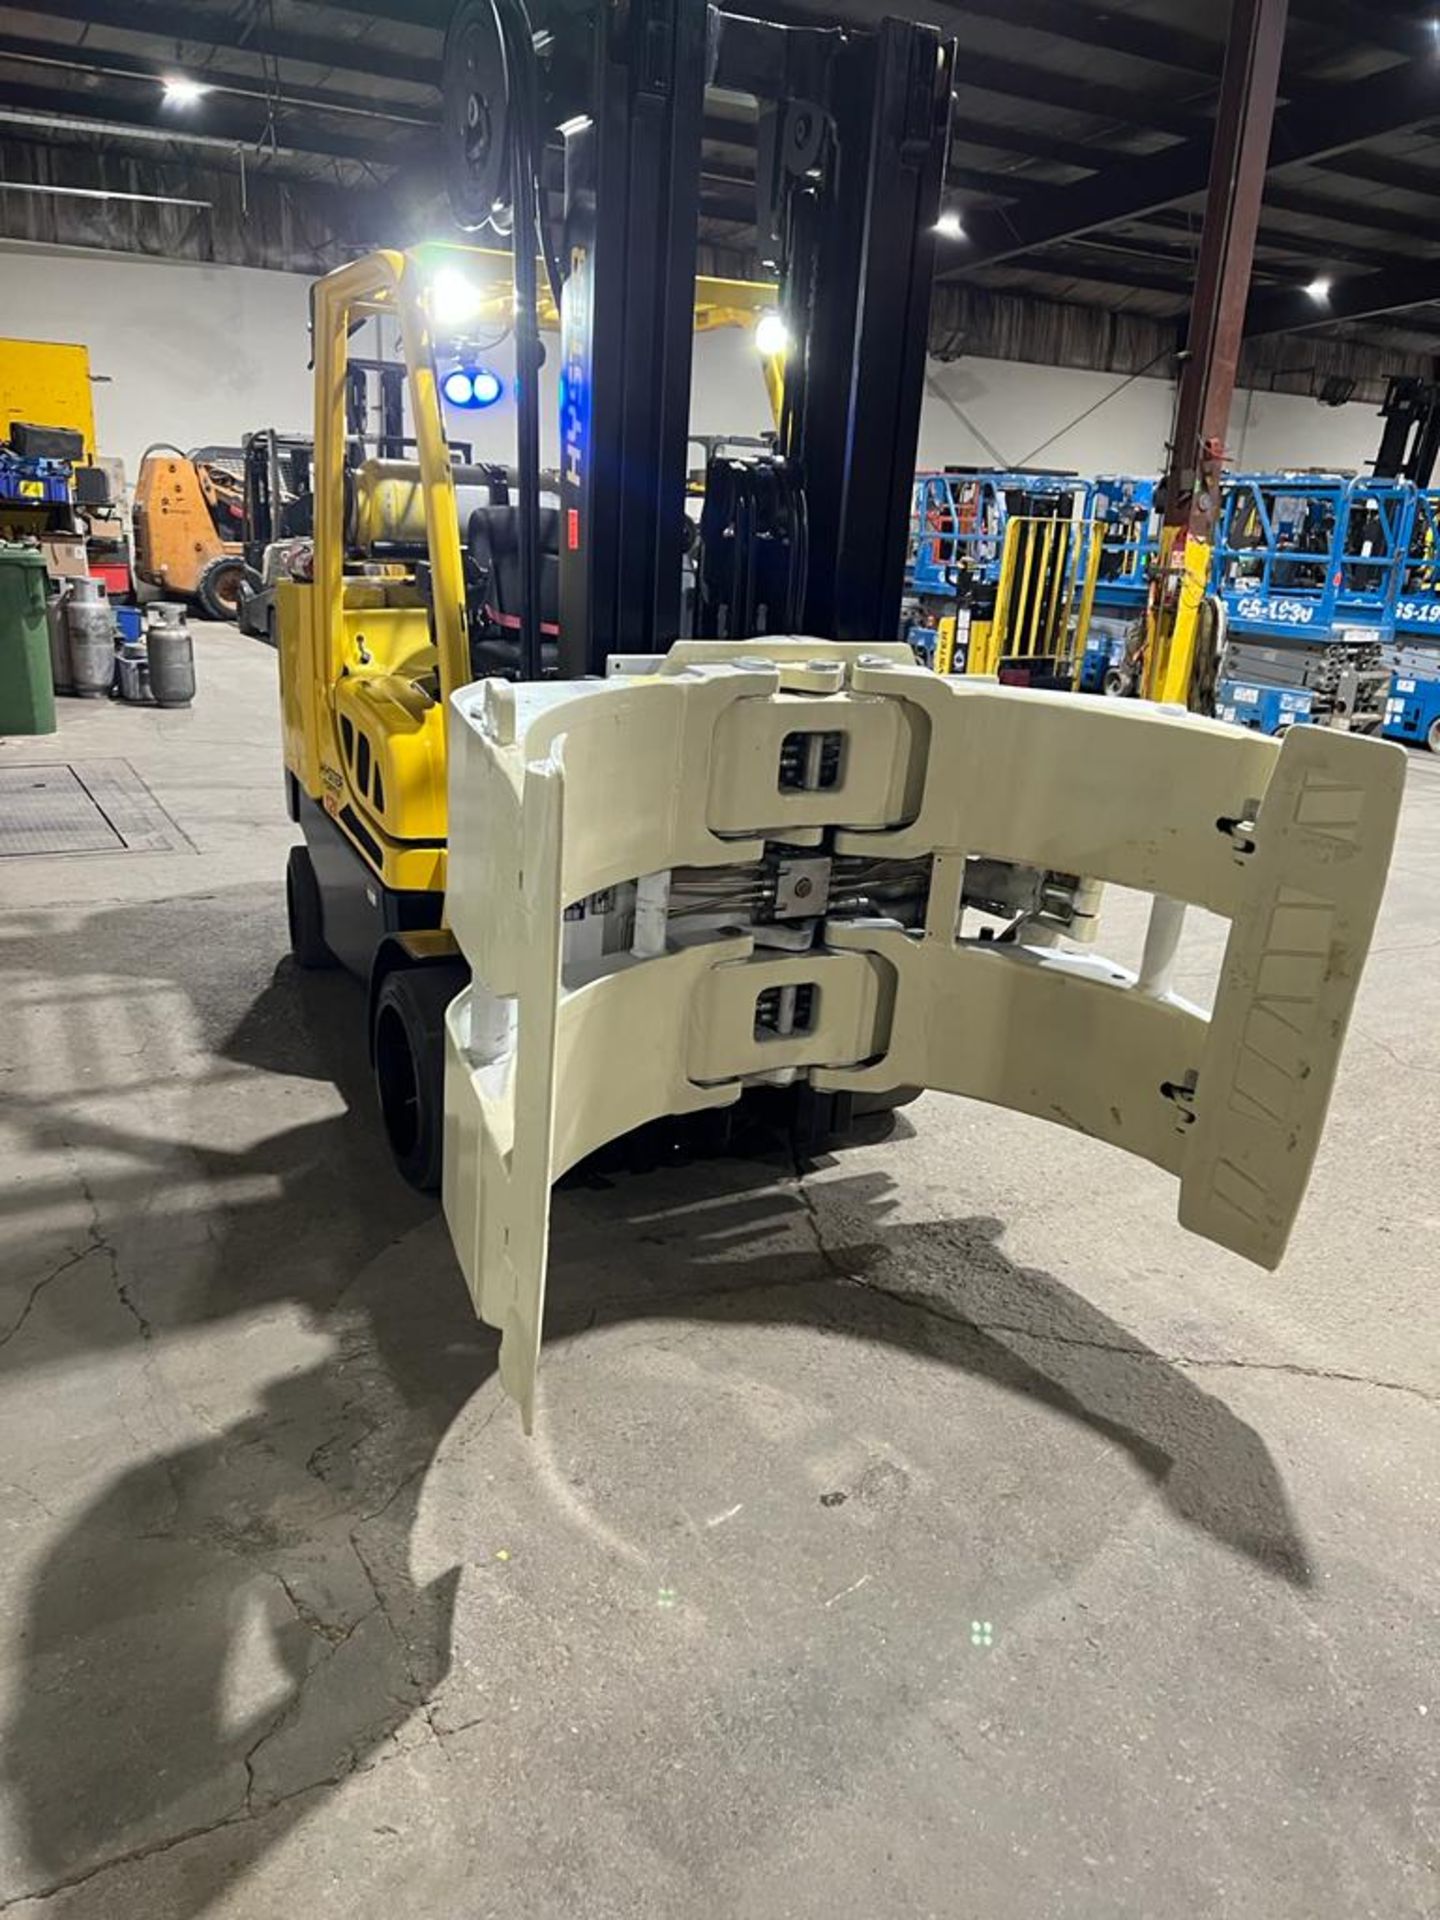 MINT ** 2017 Hyster 120 - 12,000lbs Capacity Forklift CASCADE ROLL CLAMP & Sideshift & positioner - Image 7 of 7